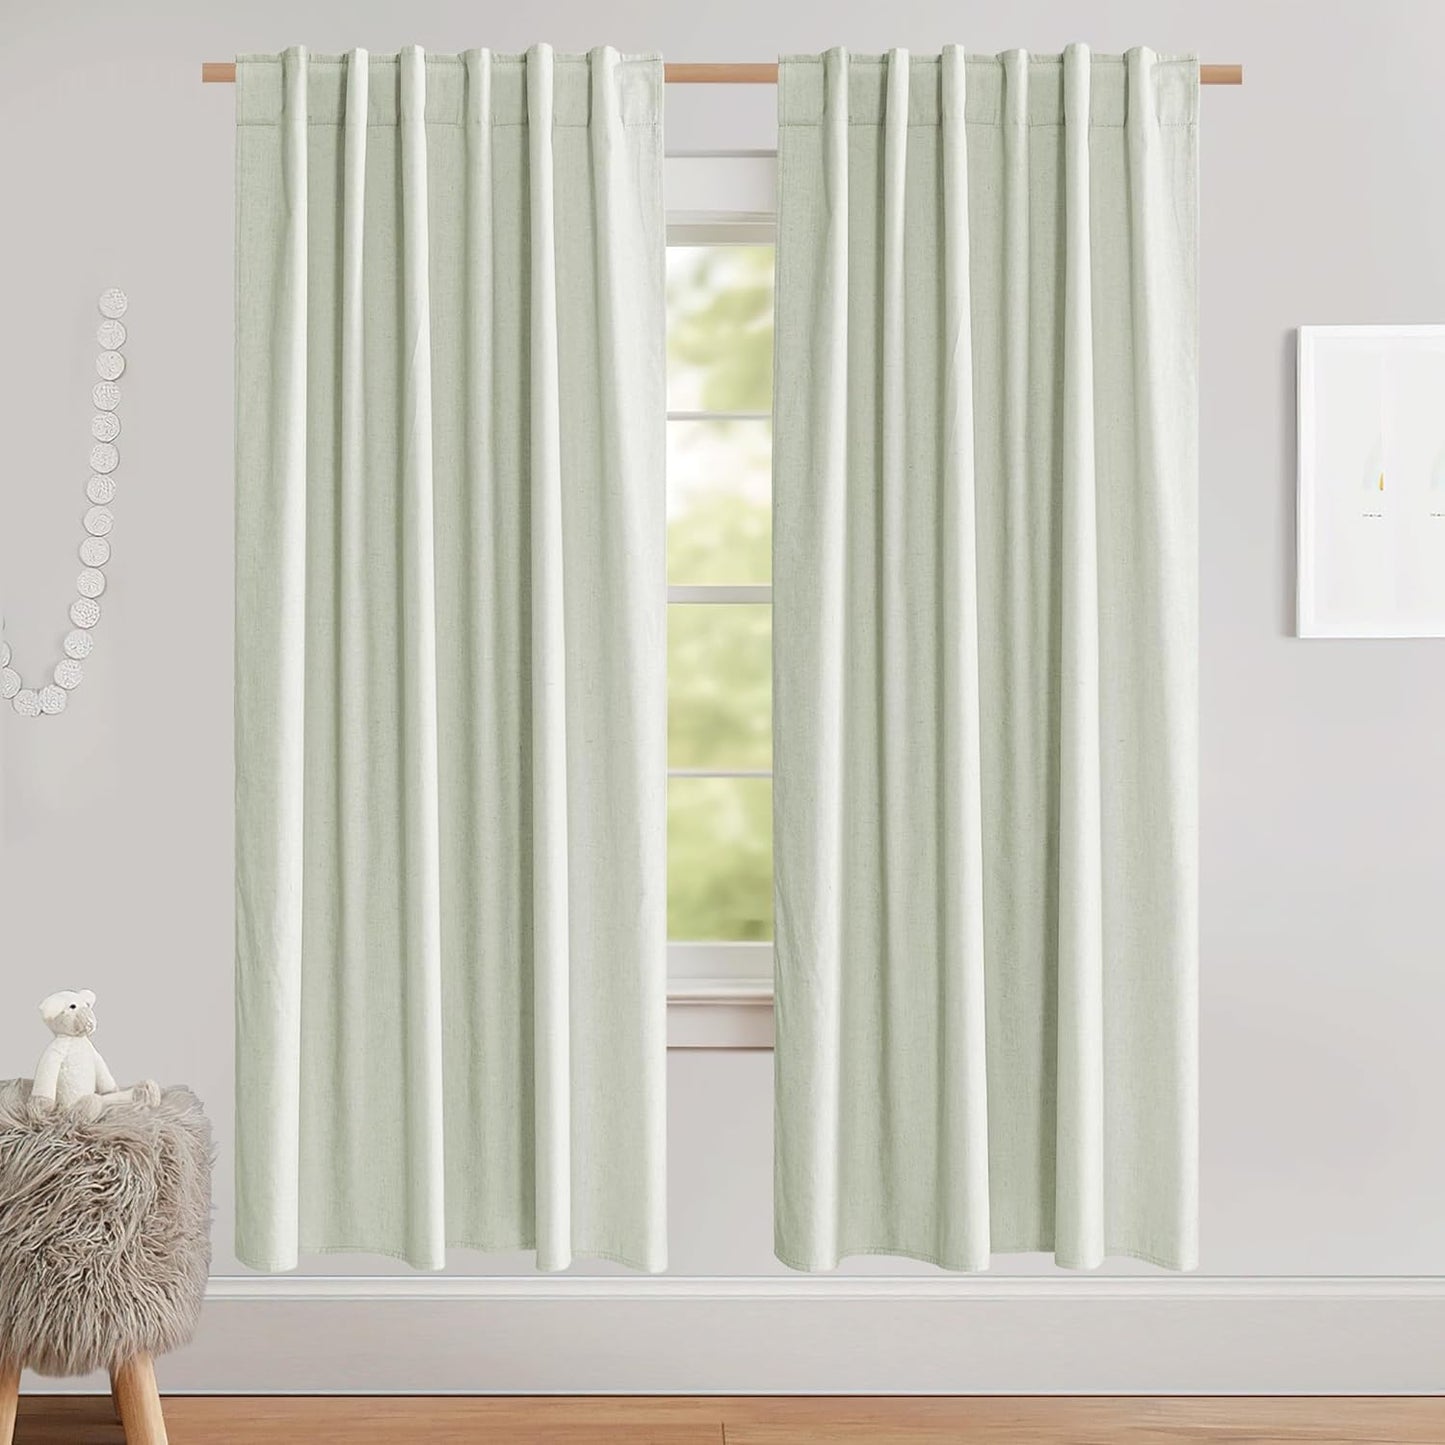 NICETOWN 100% Blackout Linen Curtains for Living Room with Thermal Insulated White Liner, Ivory, 52" Wide, 2 Panels, 84" Long Drapes, Back Tab Retro Linen Curtains Vertical Drapes Privacy for Bedroom  NICETOWN Sage Green W52 X L72 